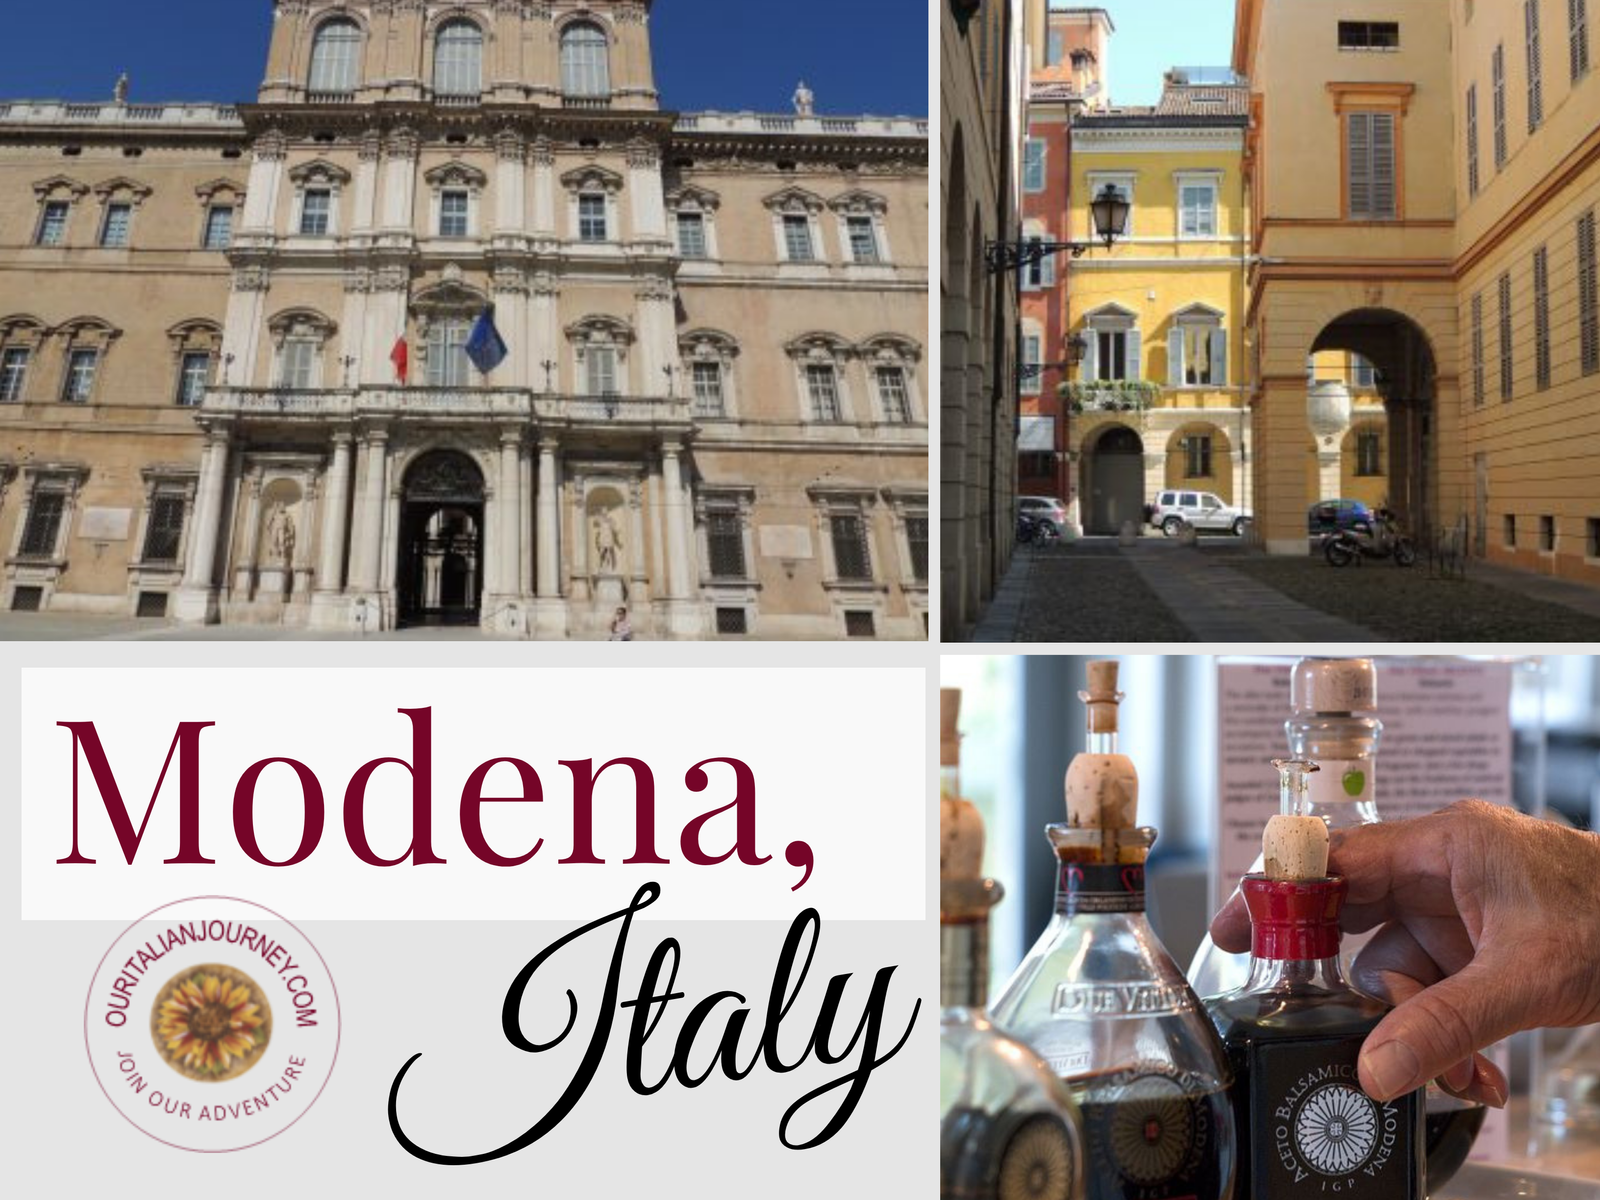 Modena Italy is known for its balsamic vinegar and iconic Italian sports cars.